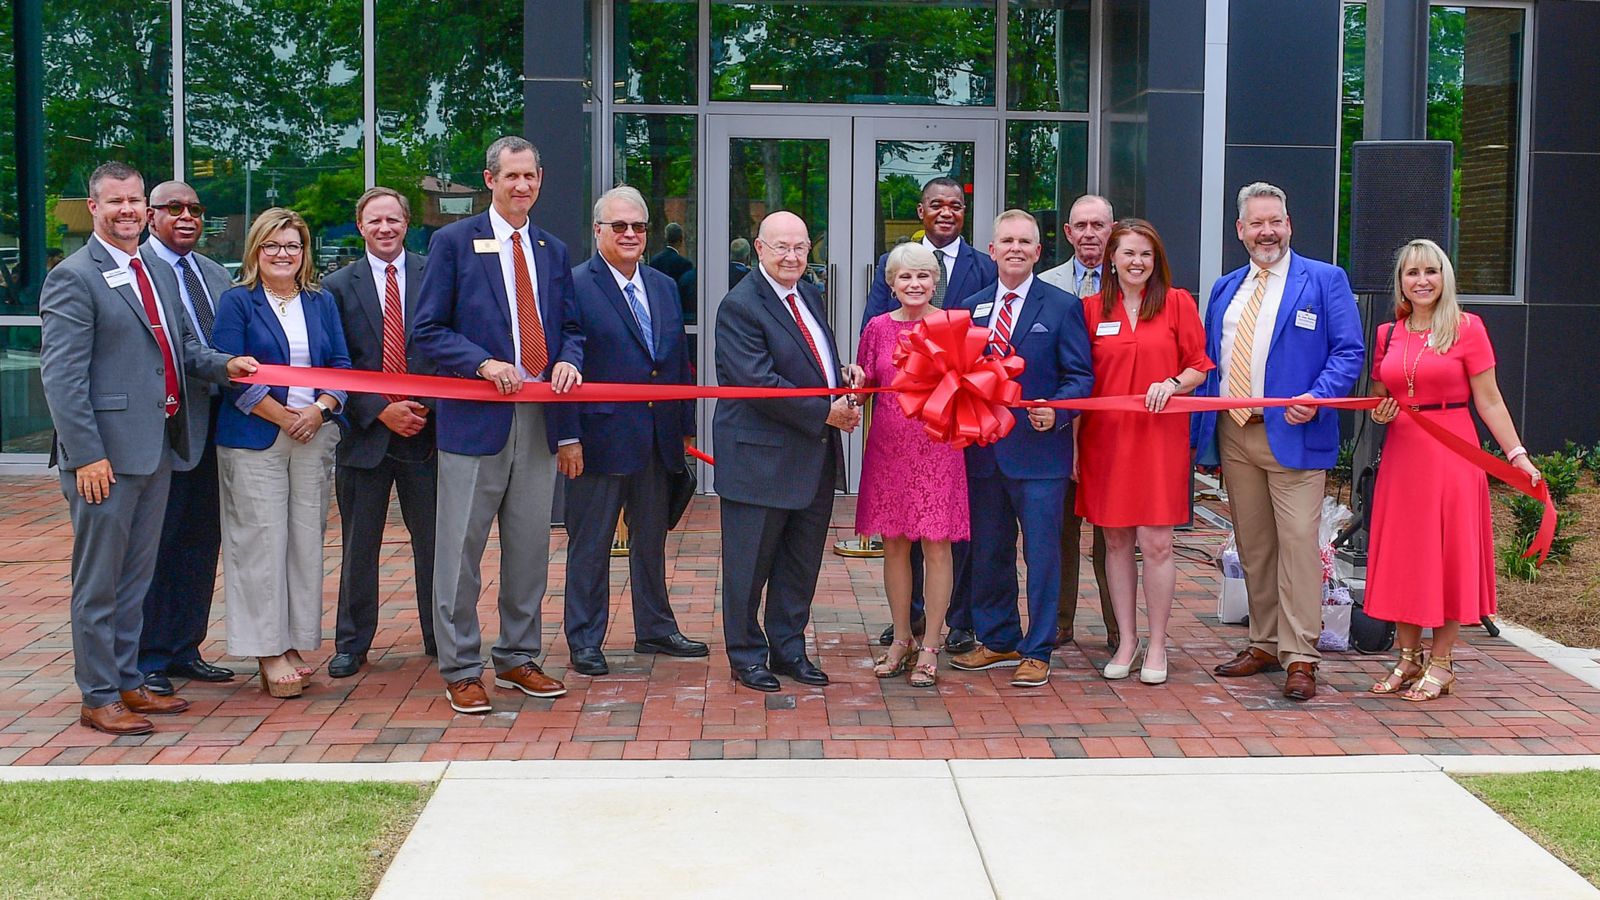 Members of the Alabama Community College Board of Trustees and the Gadsden State Executive Cabinet at the ribbon cutting for the AMC